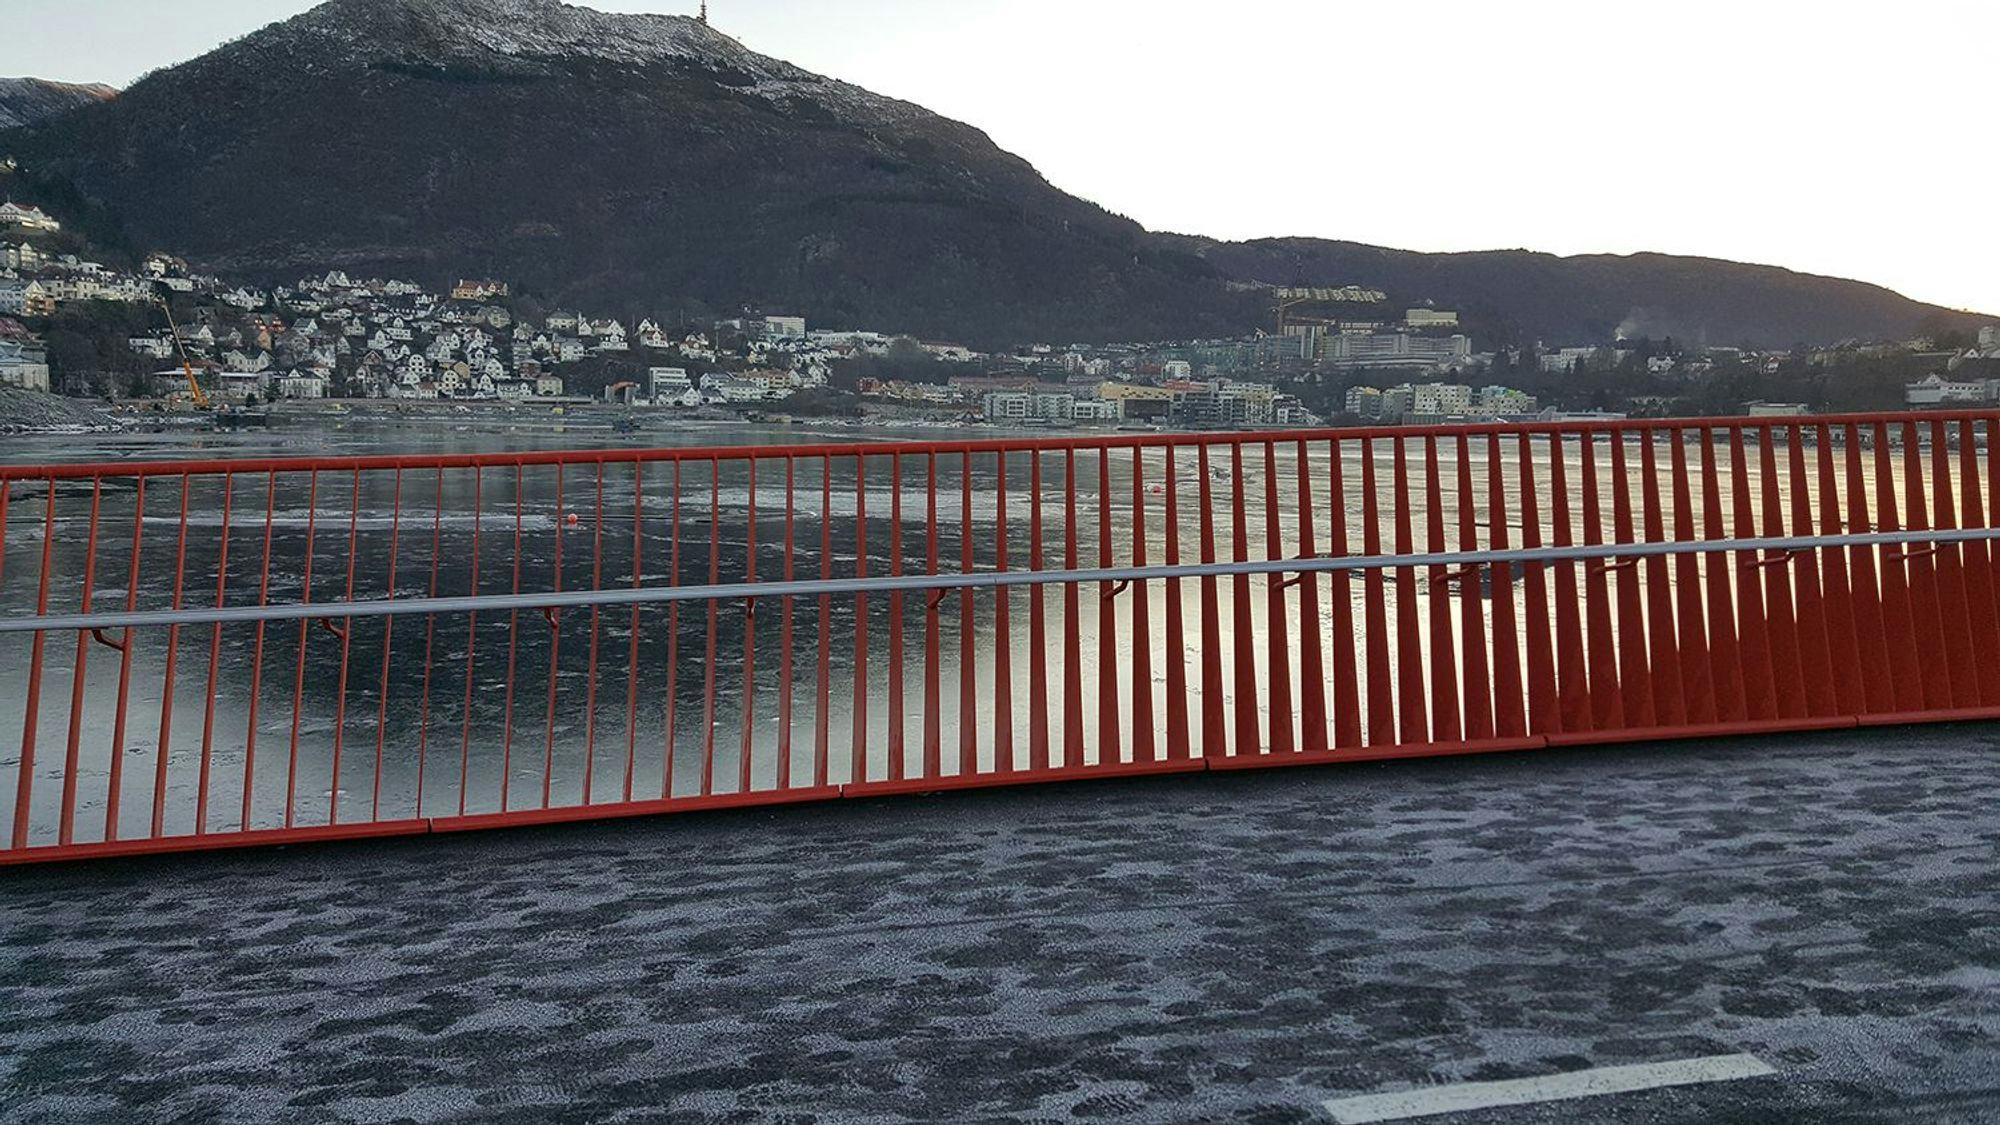 A red bridge over water with a mountain in the background